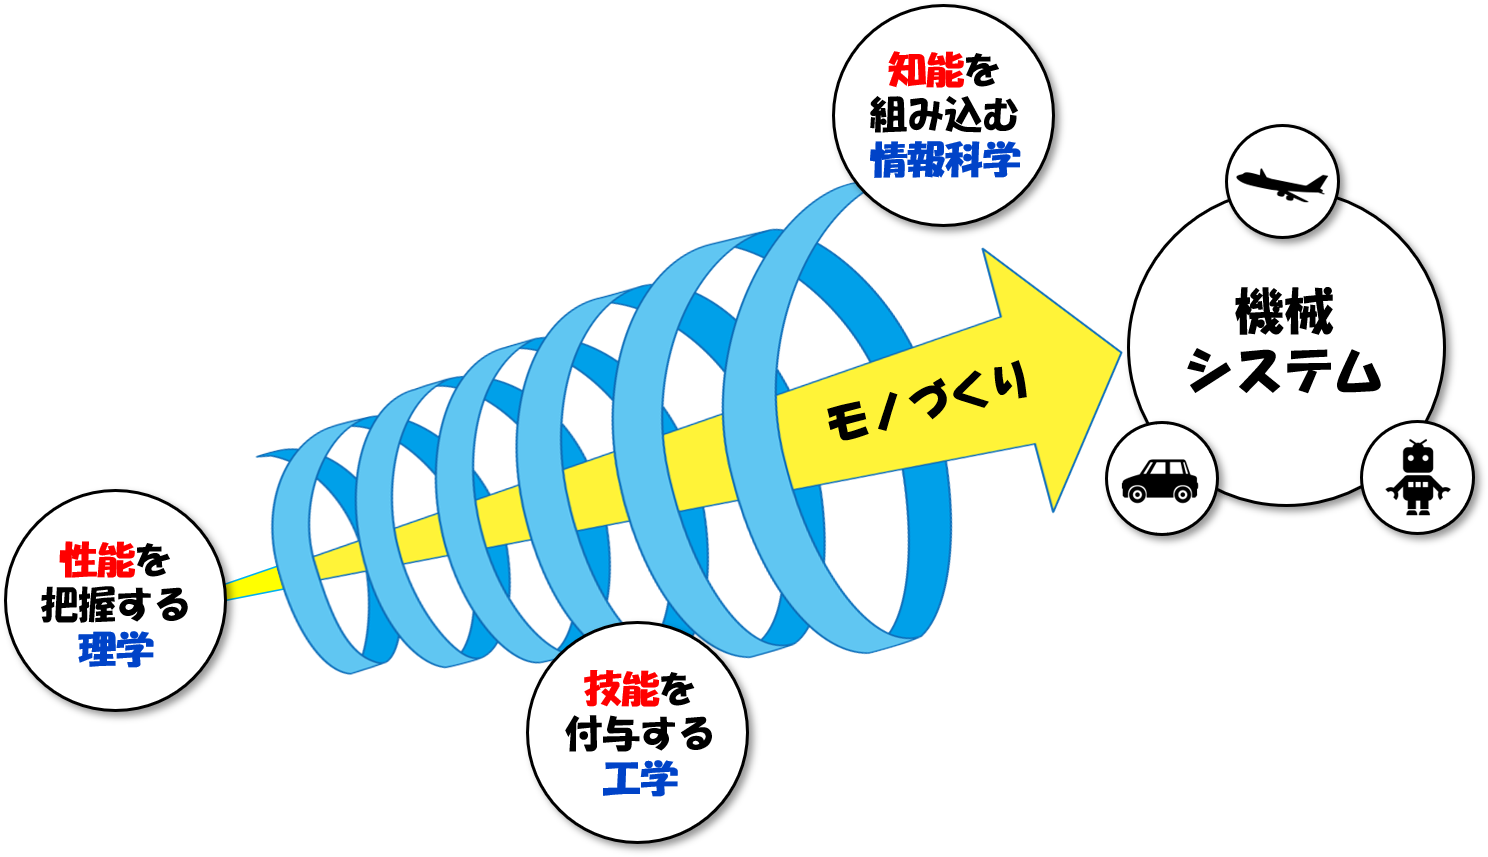 spiral_3functions.png